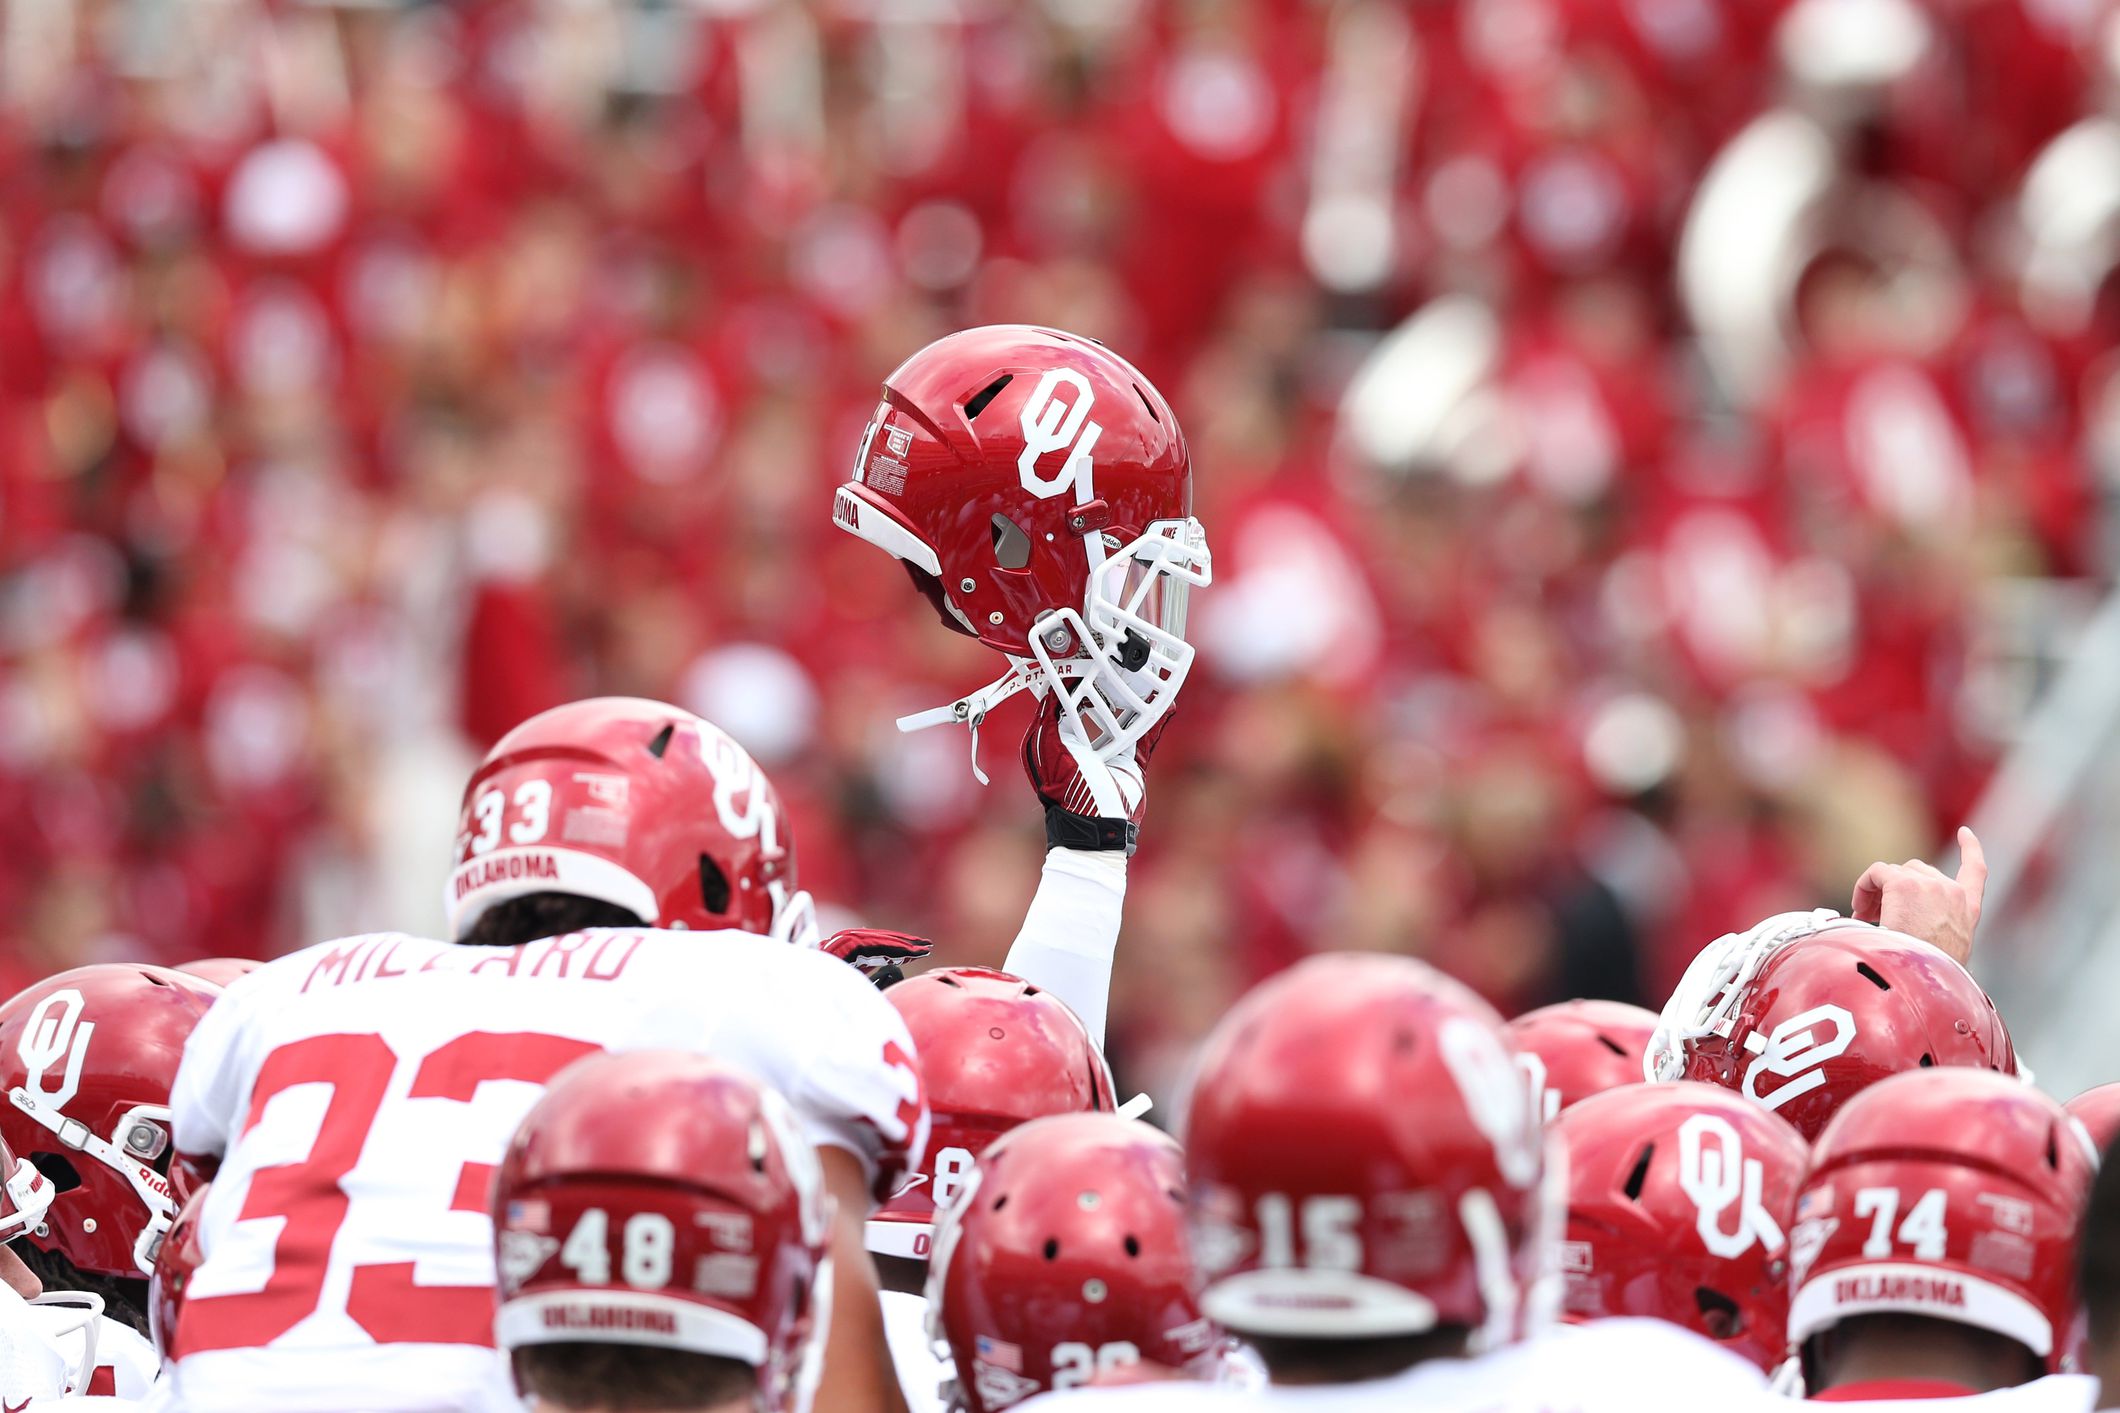 2013 Oklahoma football schedule: Opponents, game dates and more